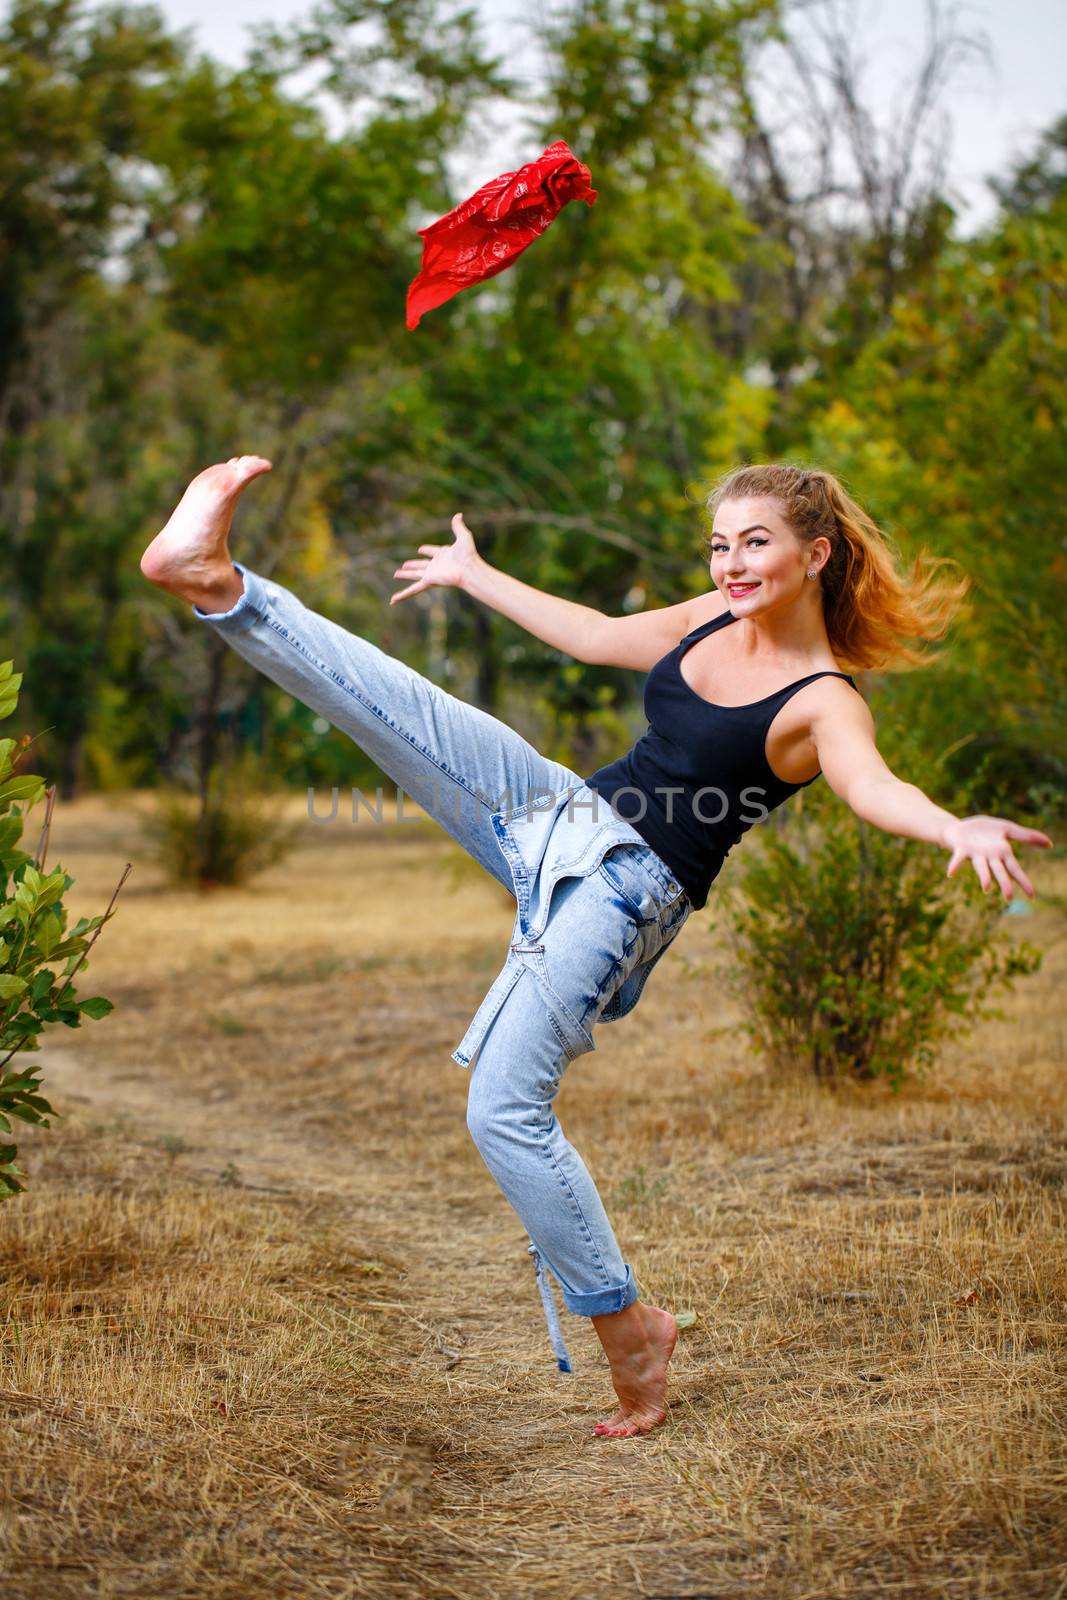 Beautiful pin-up girl barefoot in jeans overalls throws a red bandanna